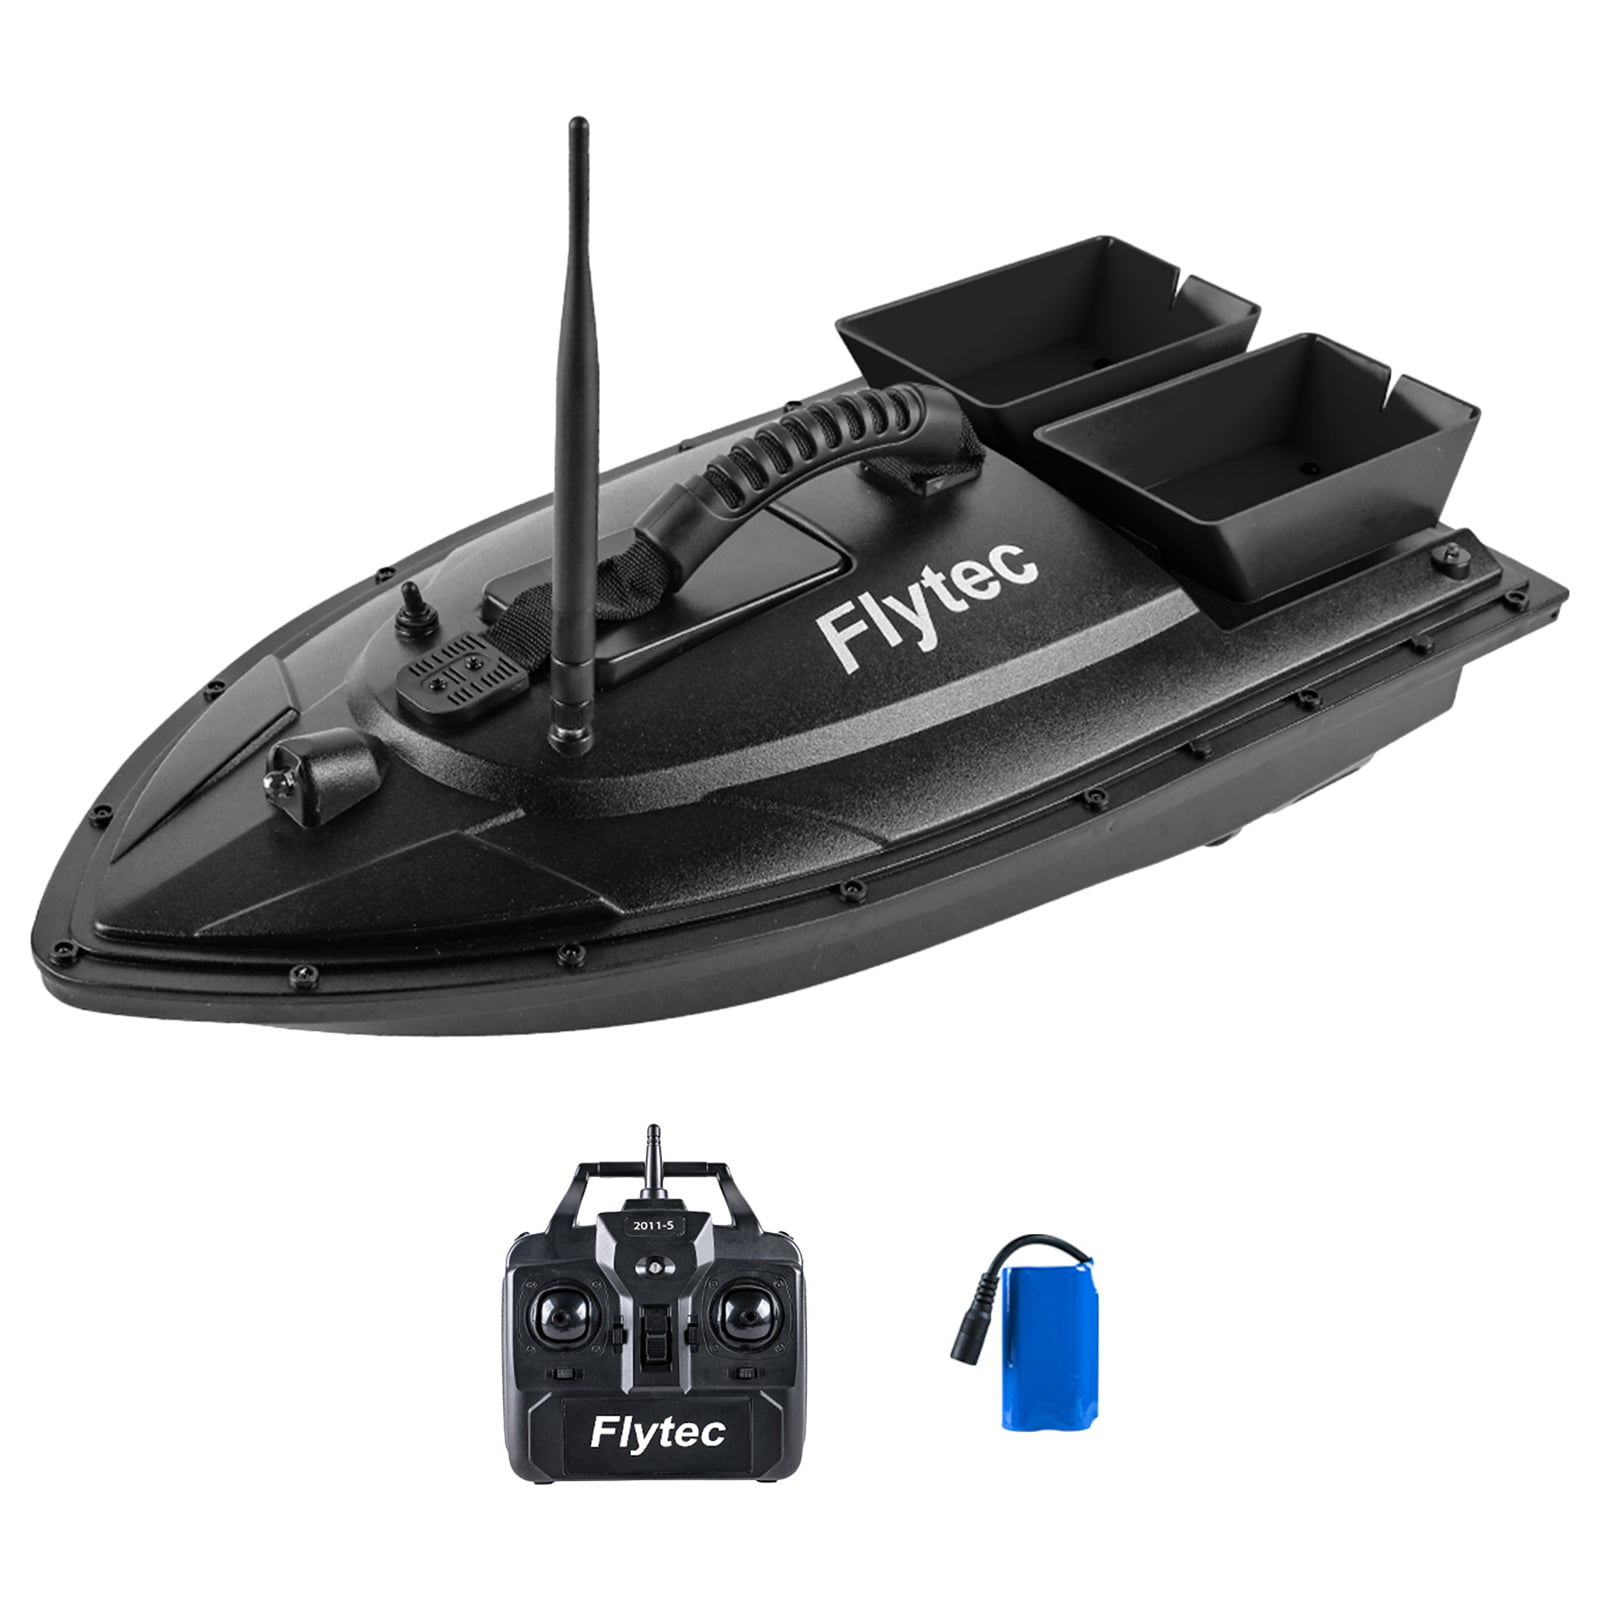 RUIXFFT RC Boat,Race Remote Control Boat,Fish Finder 500M Remote Control Fishing Bait Boat for Adults and Kids Black 